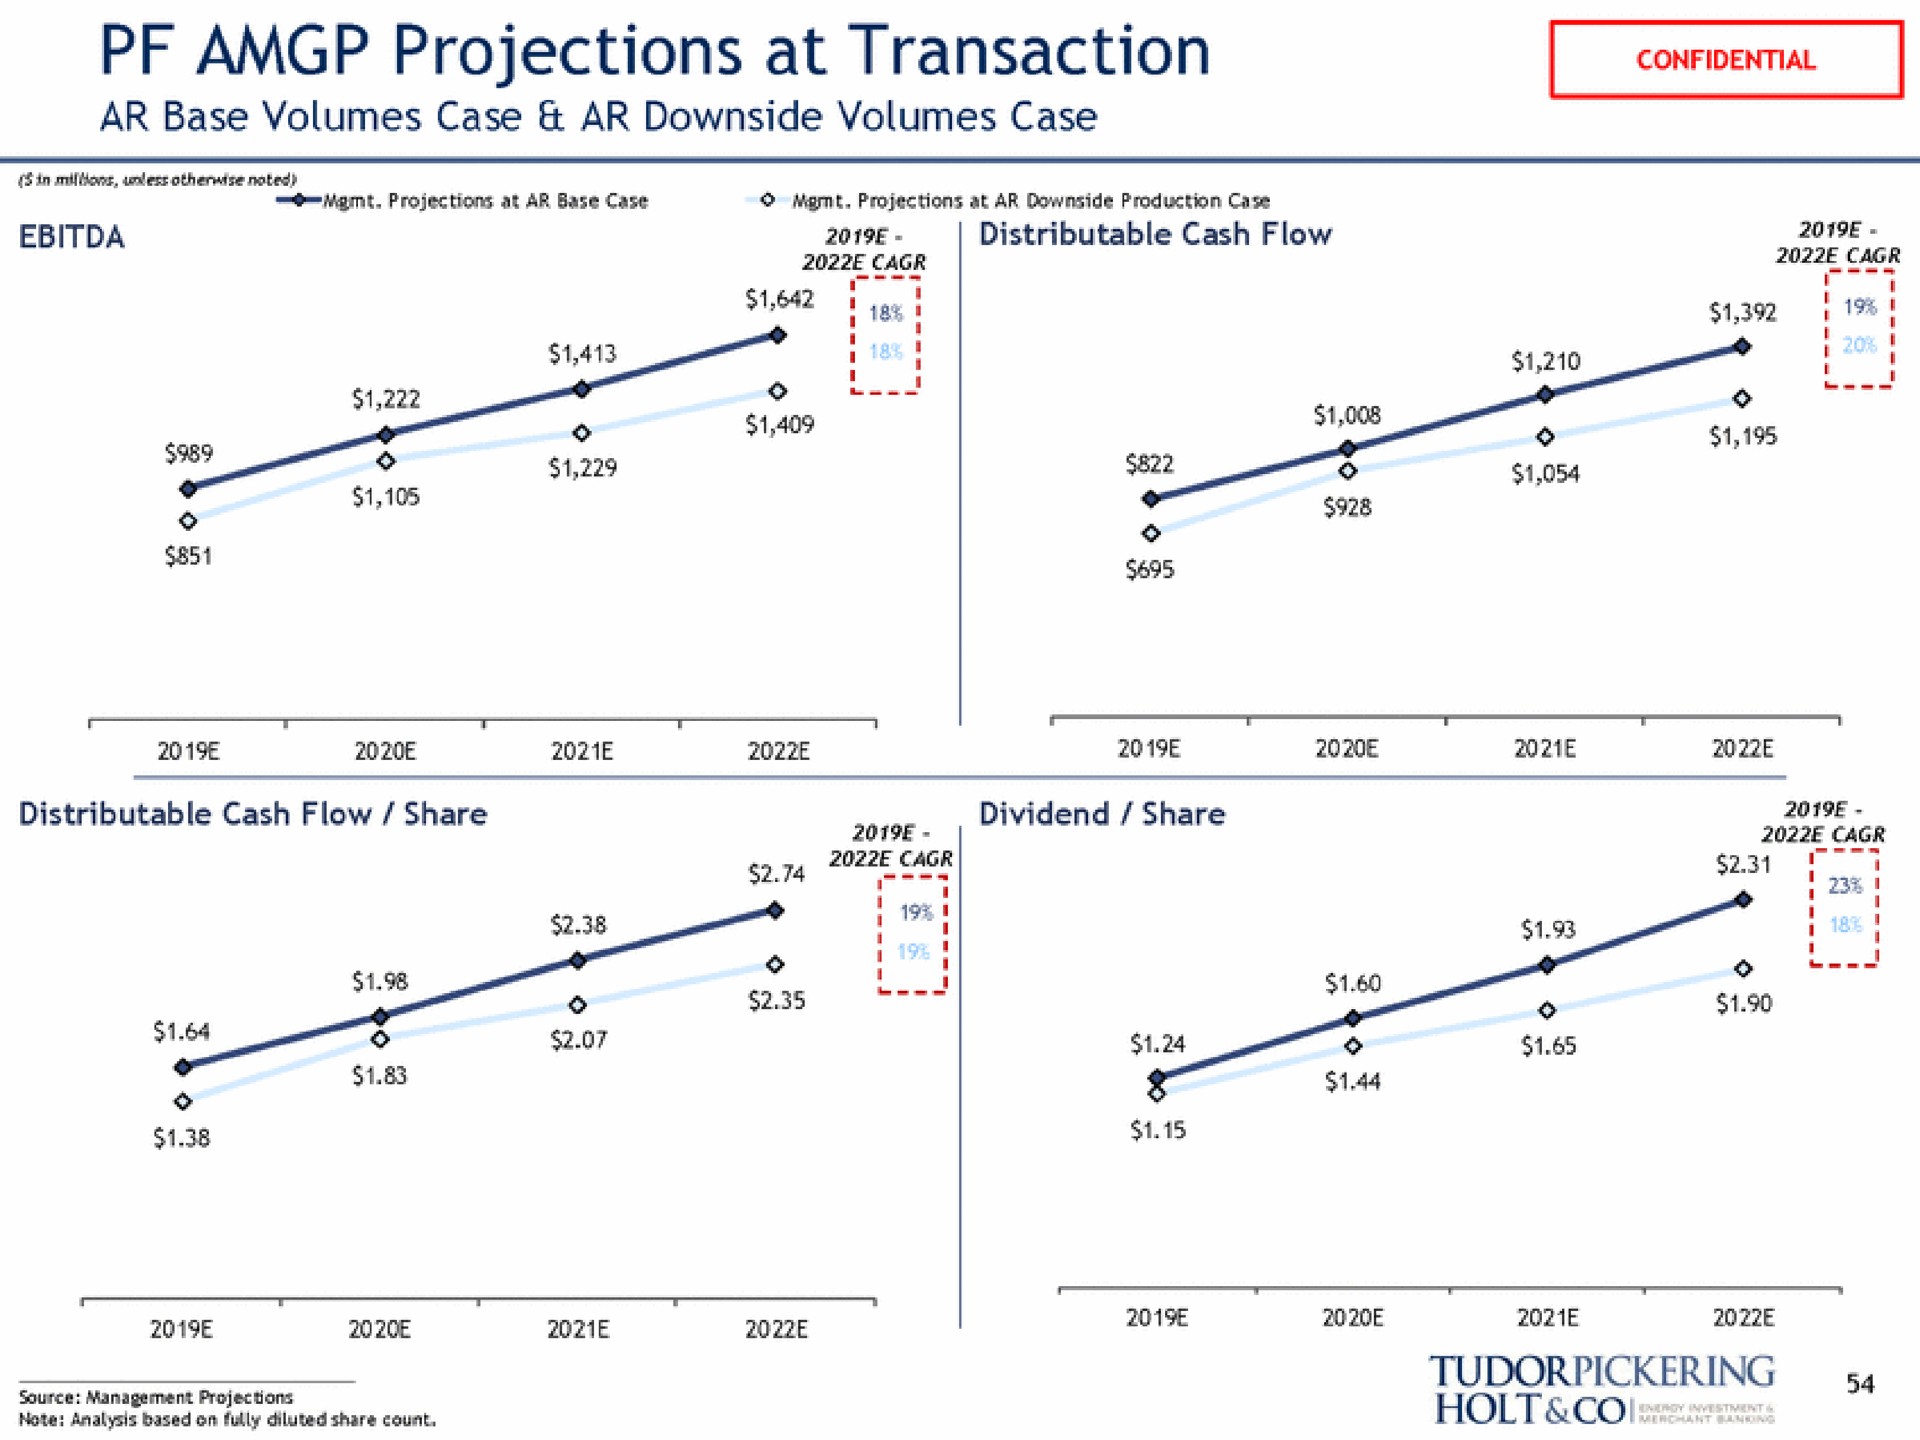 projections at transaction sats to | Tudor, Pickering, Holt & Co